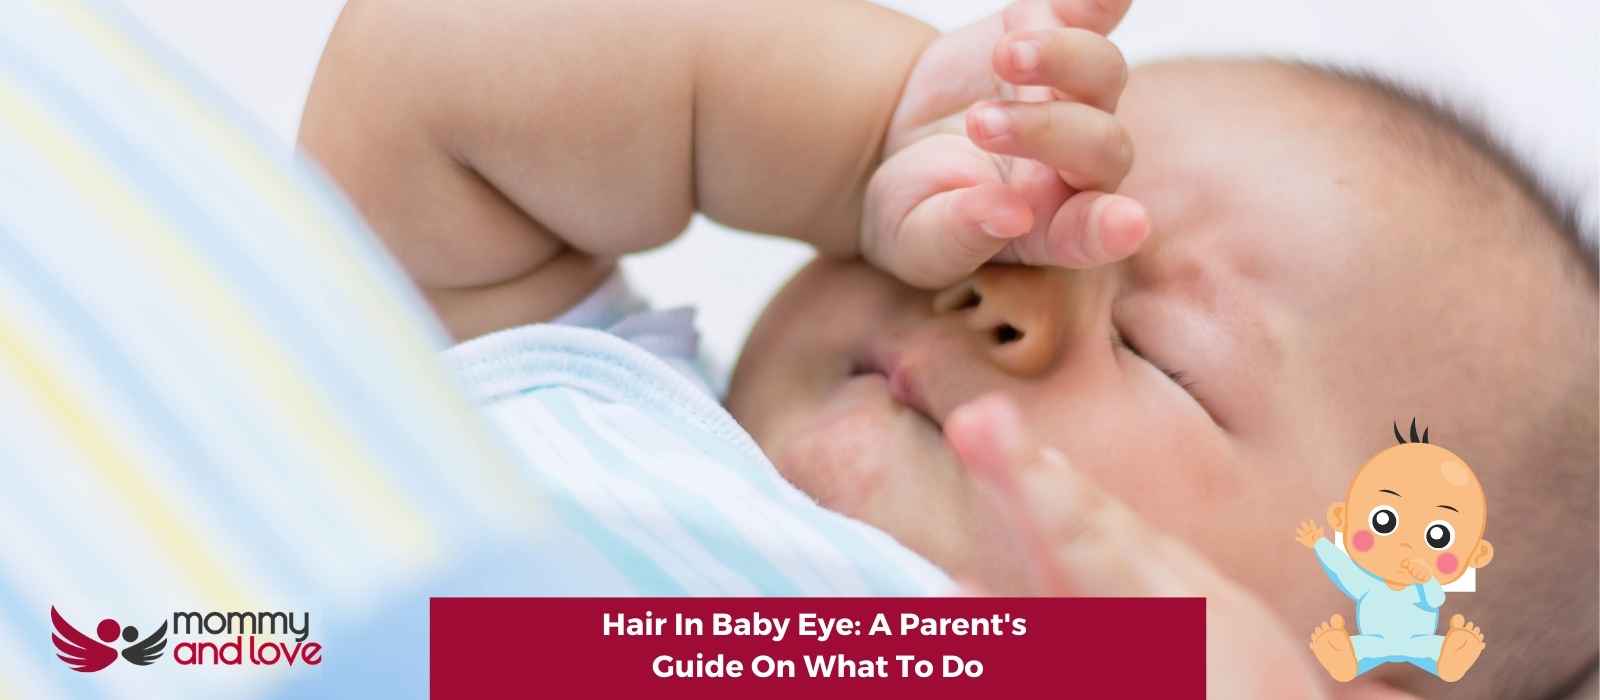 Hair In Baby Eye: A Parent’s Guide On What To Do